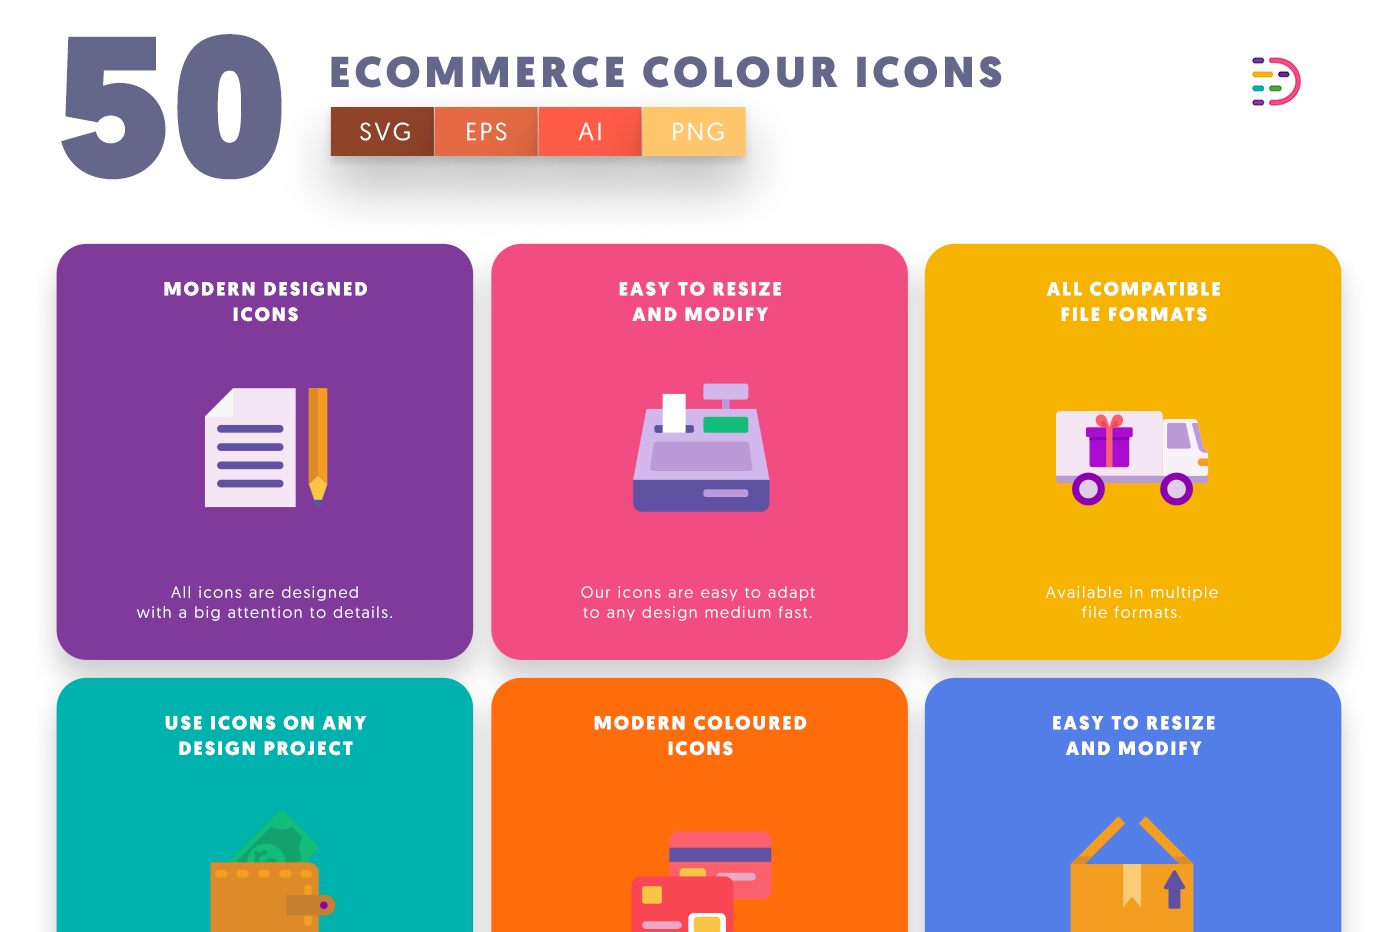  Ecommerce Colour Icons with colored backgrounds 